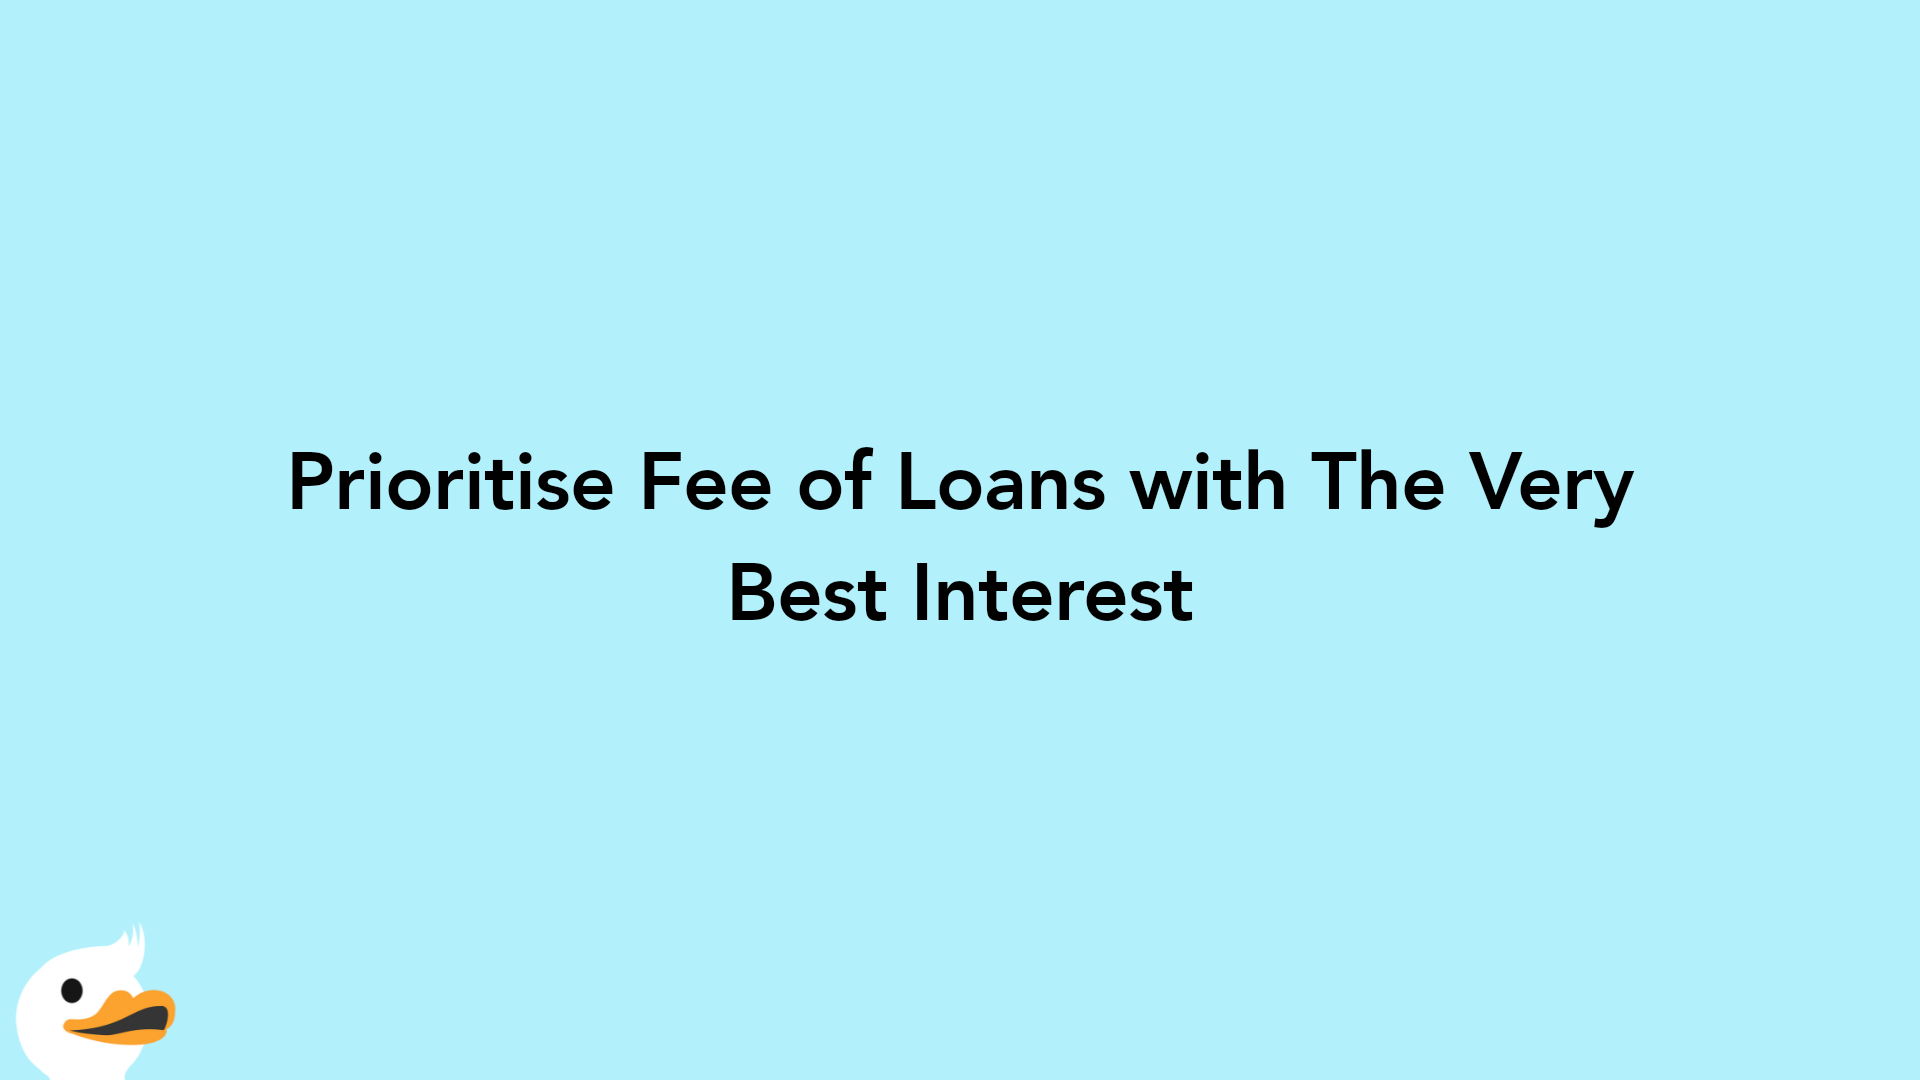 Prioritise Fee of Loans with The Very Best Interest